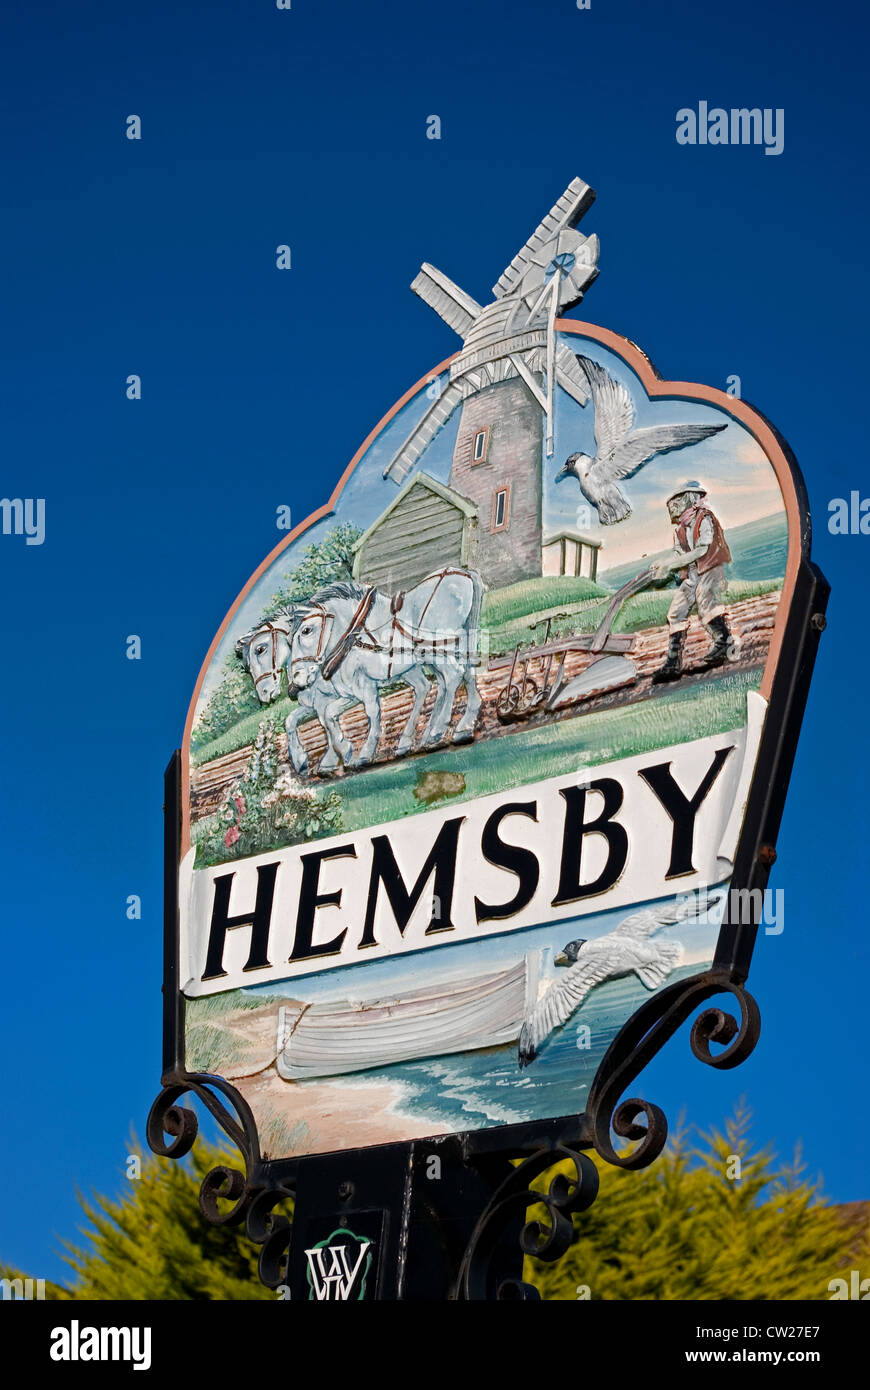 The Village Sign for Hemsby in Norfolk Stock Photo